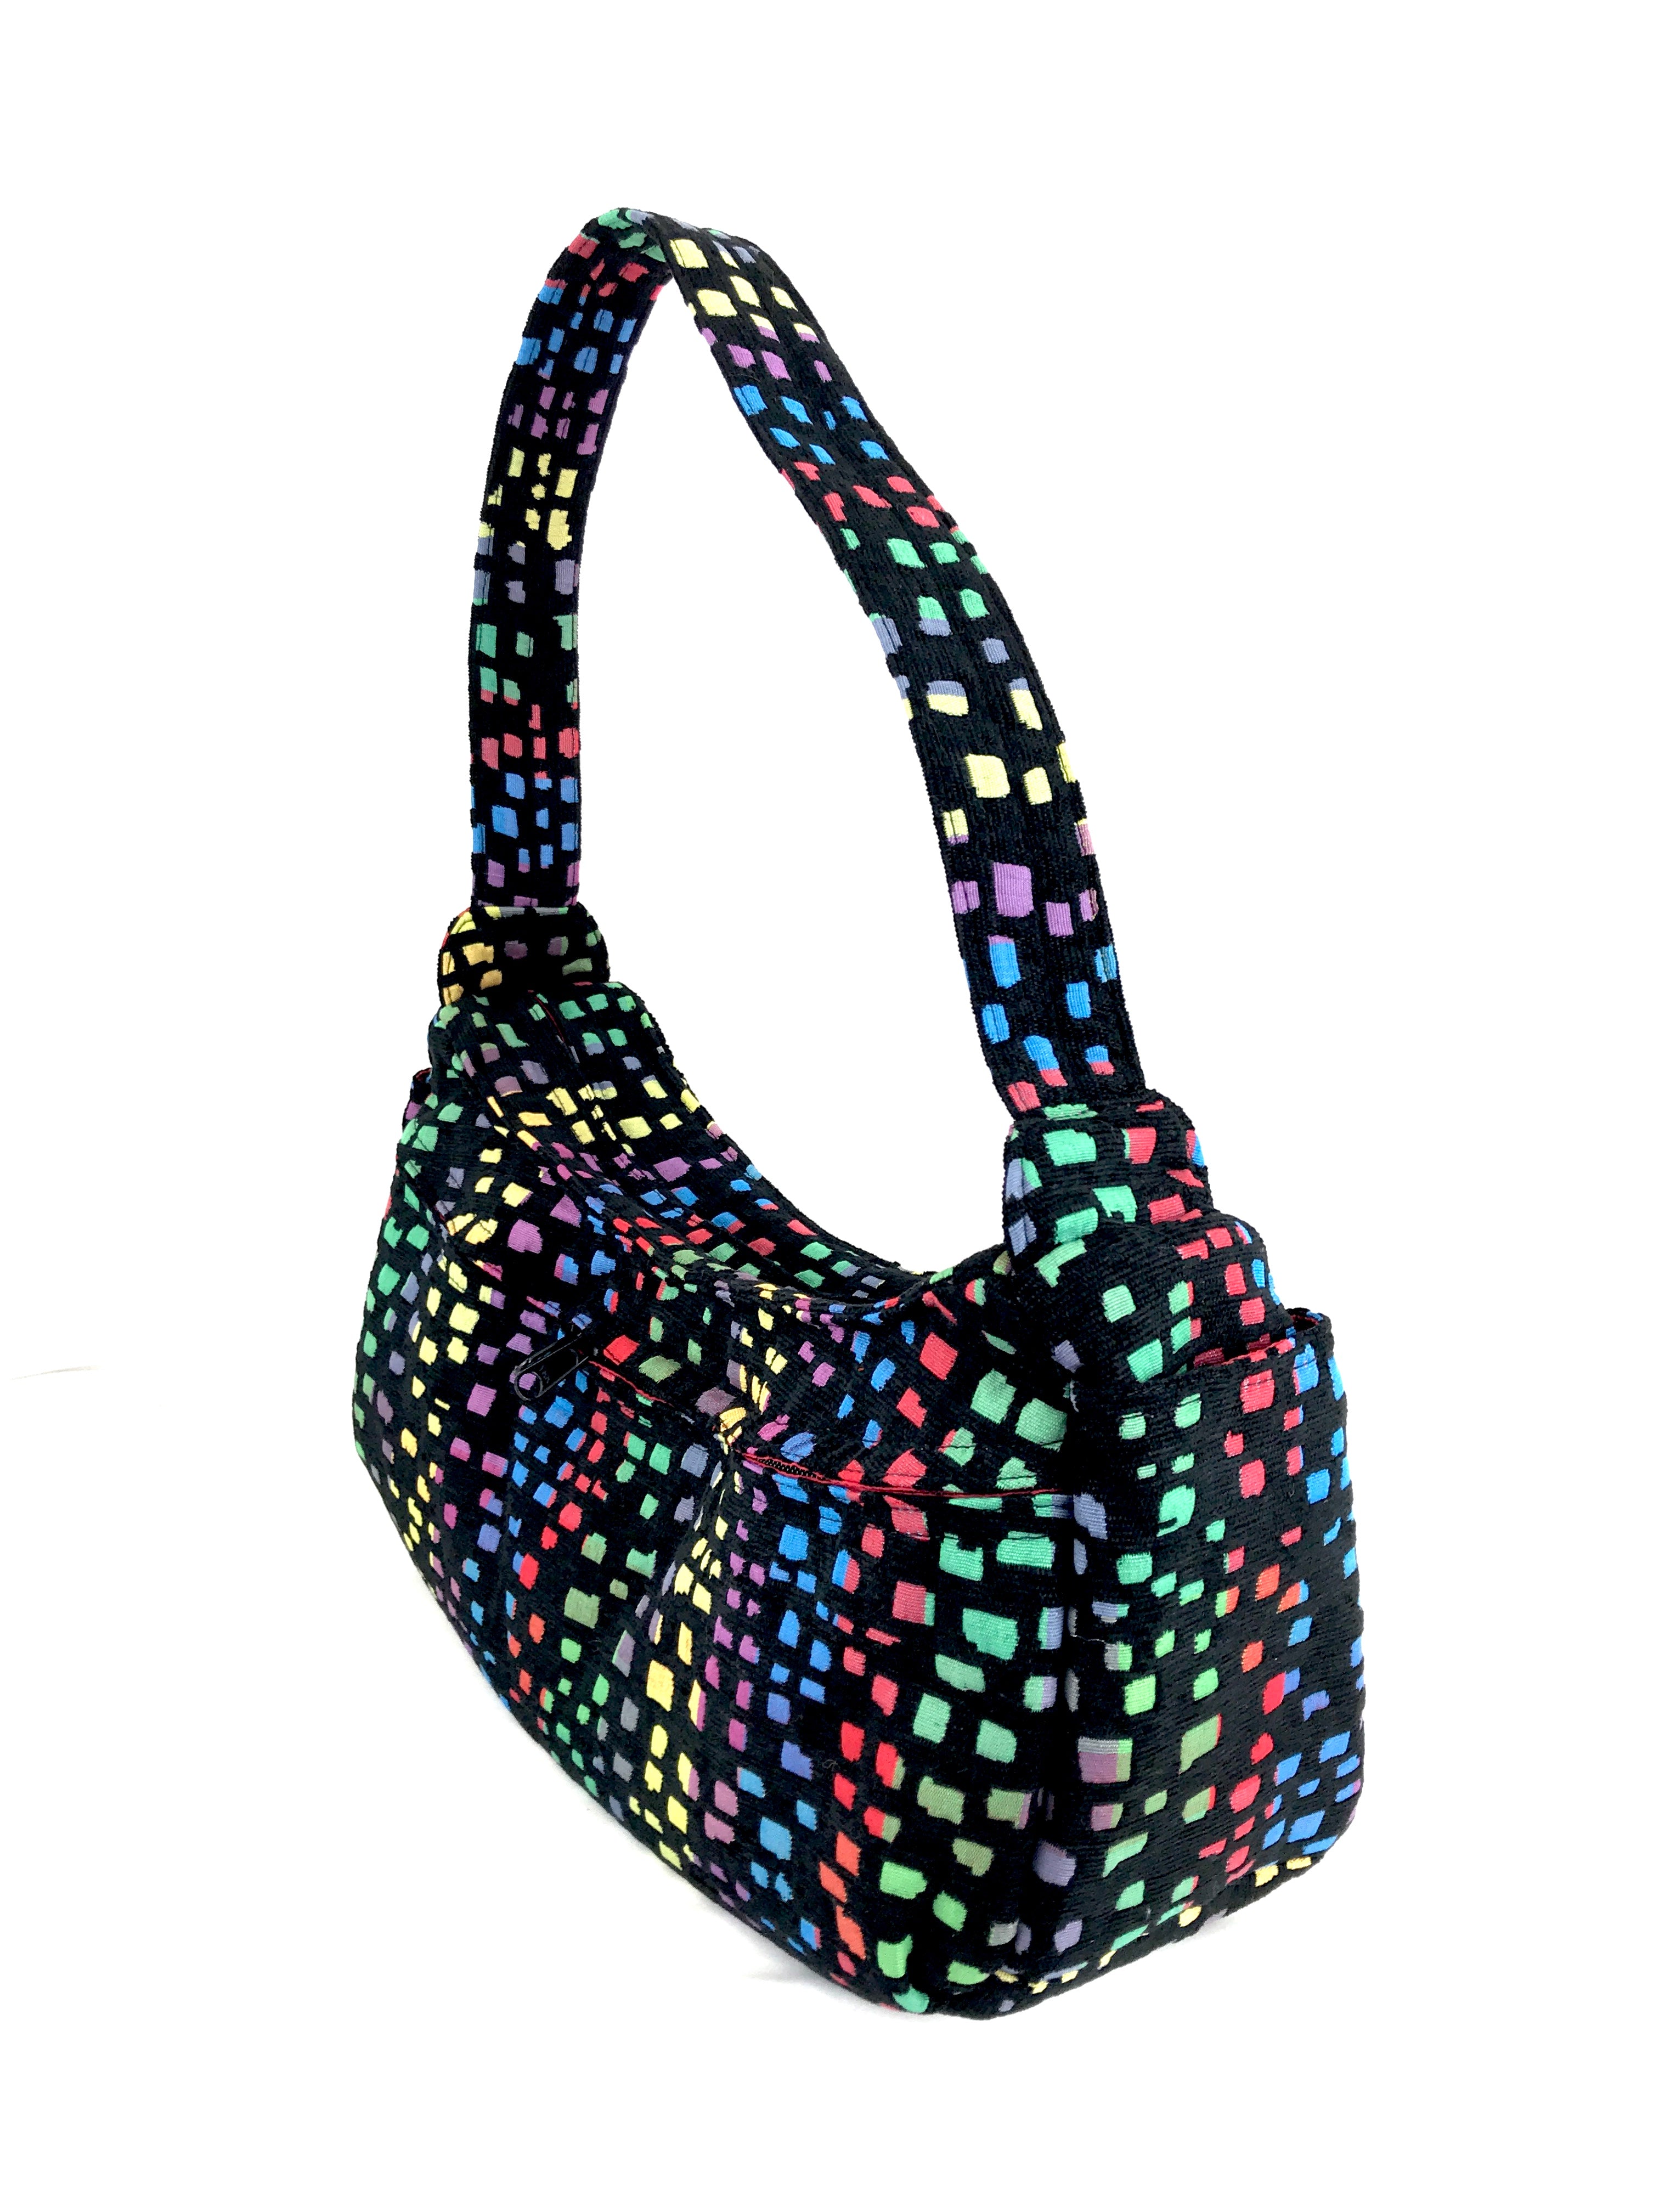 Boat Bag,  Large, in Rainbow Mosaic Chenille